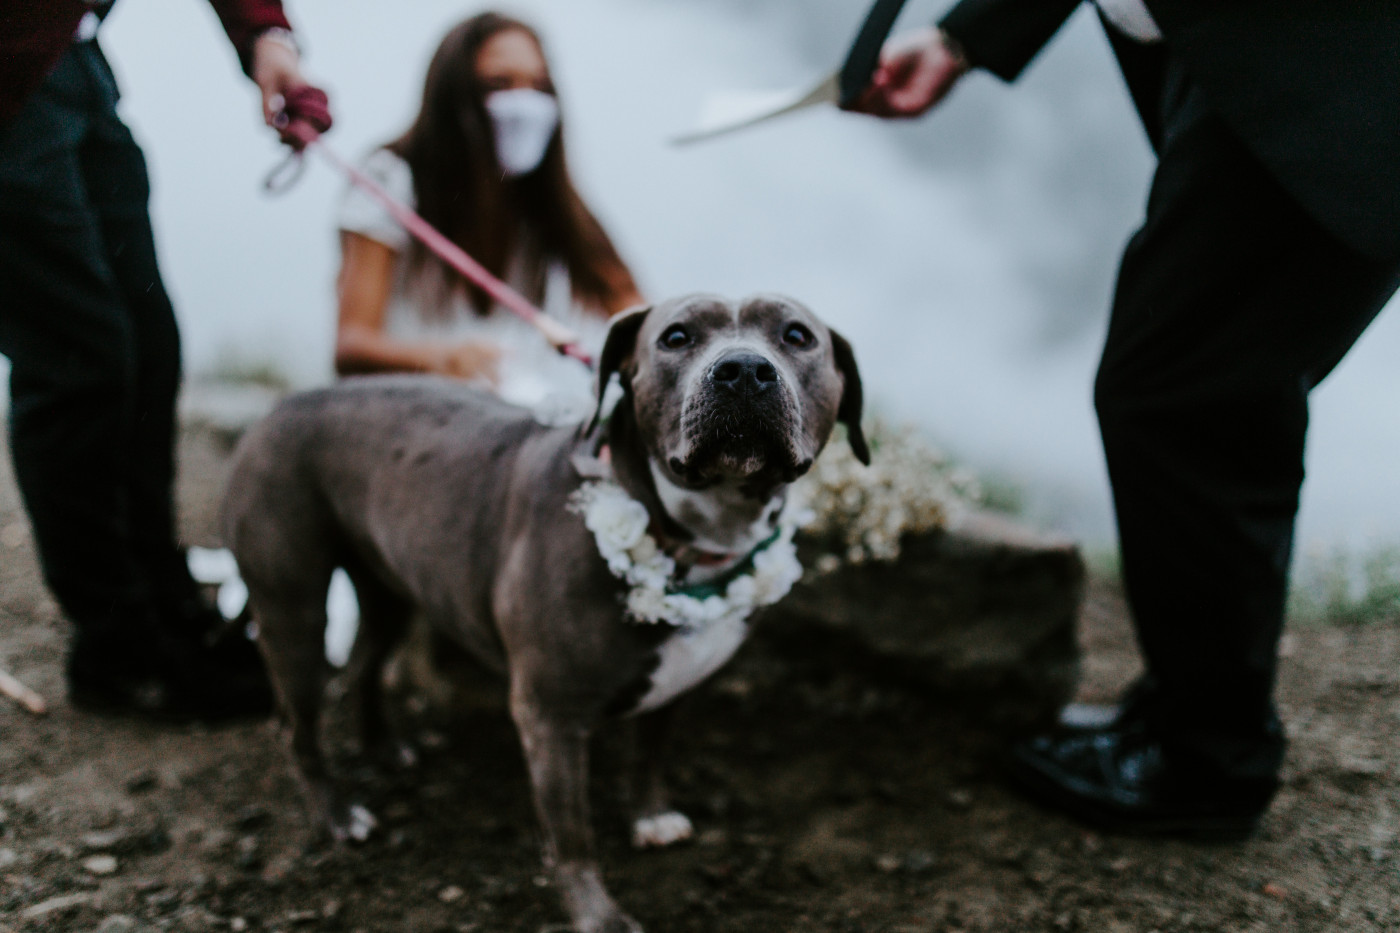 Katelyn and Murray's dog steals the spotlight. Elopement wedding photography at Mount Hood by Sienna Plus Josh.